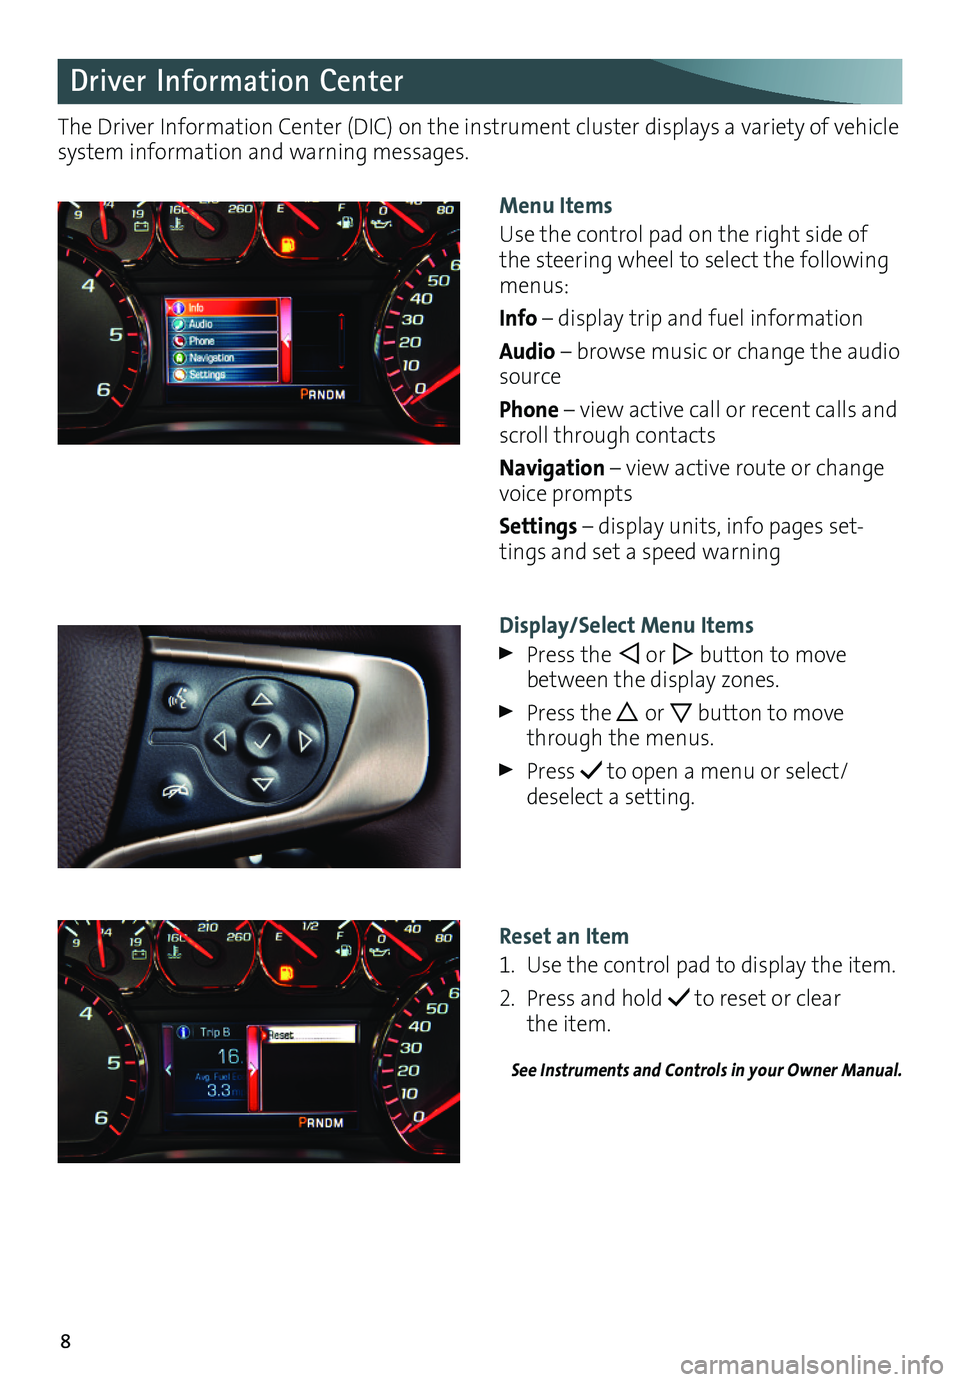 GMC YUKON 2016  Get To Know Guide 8
Driver Information Center
The Driver Information Center (DIC) on the instrument cluster displays a variety of vehicle system information and warning messages.
Menu Items
Use the control pad on the r